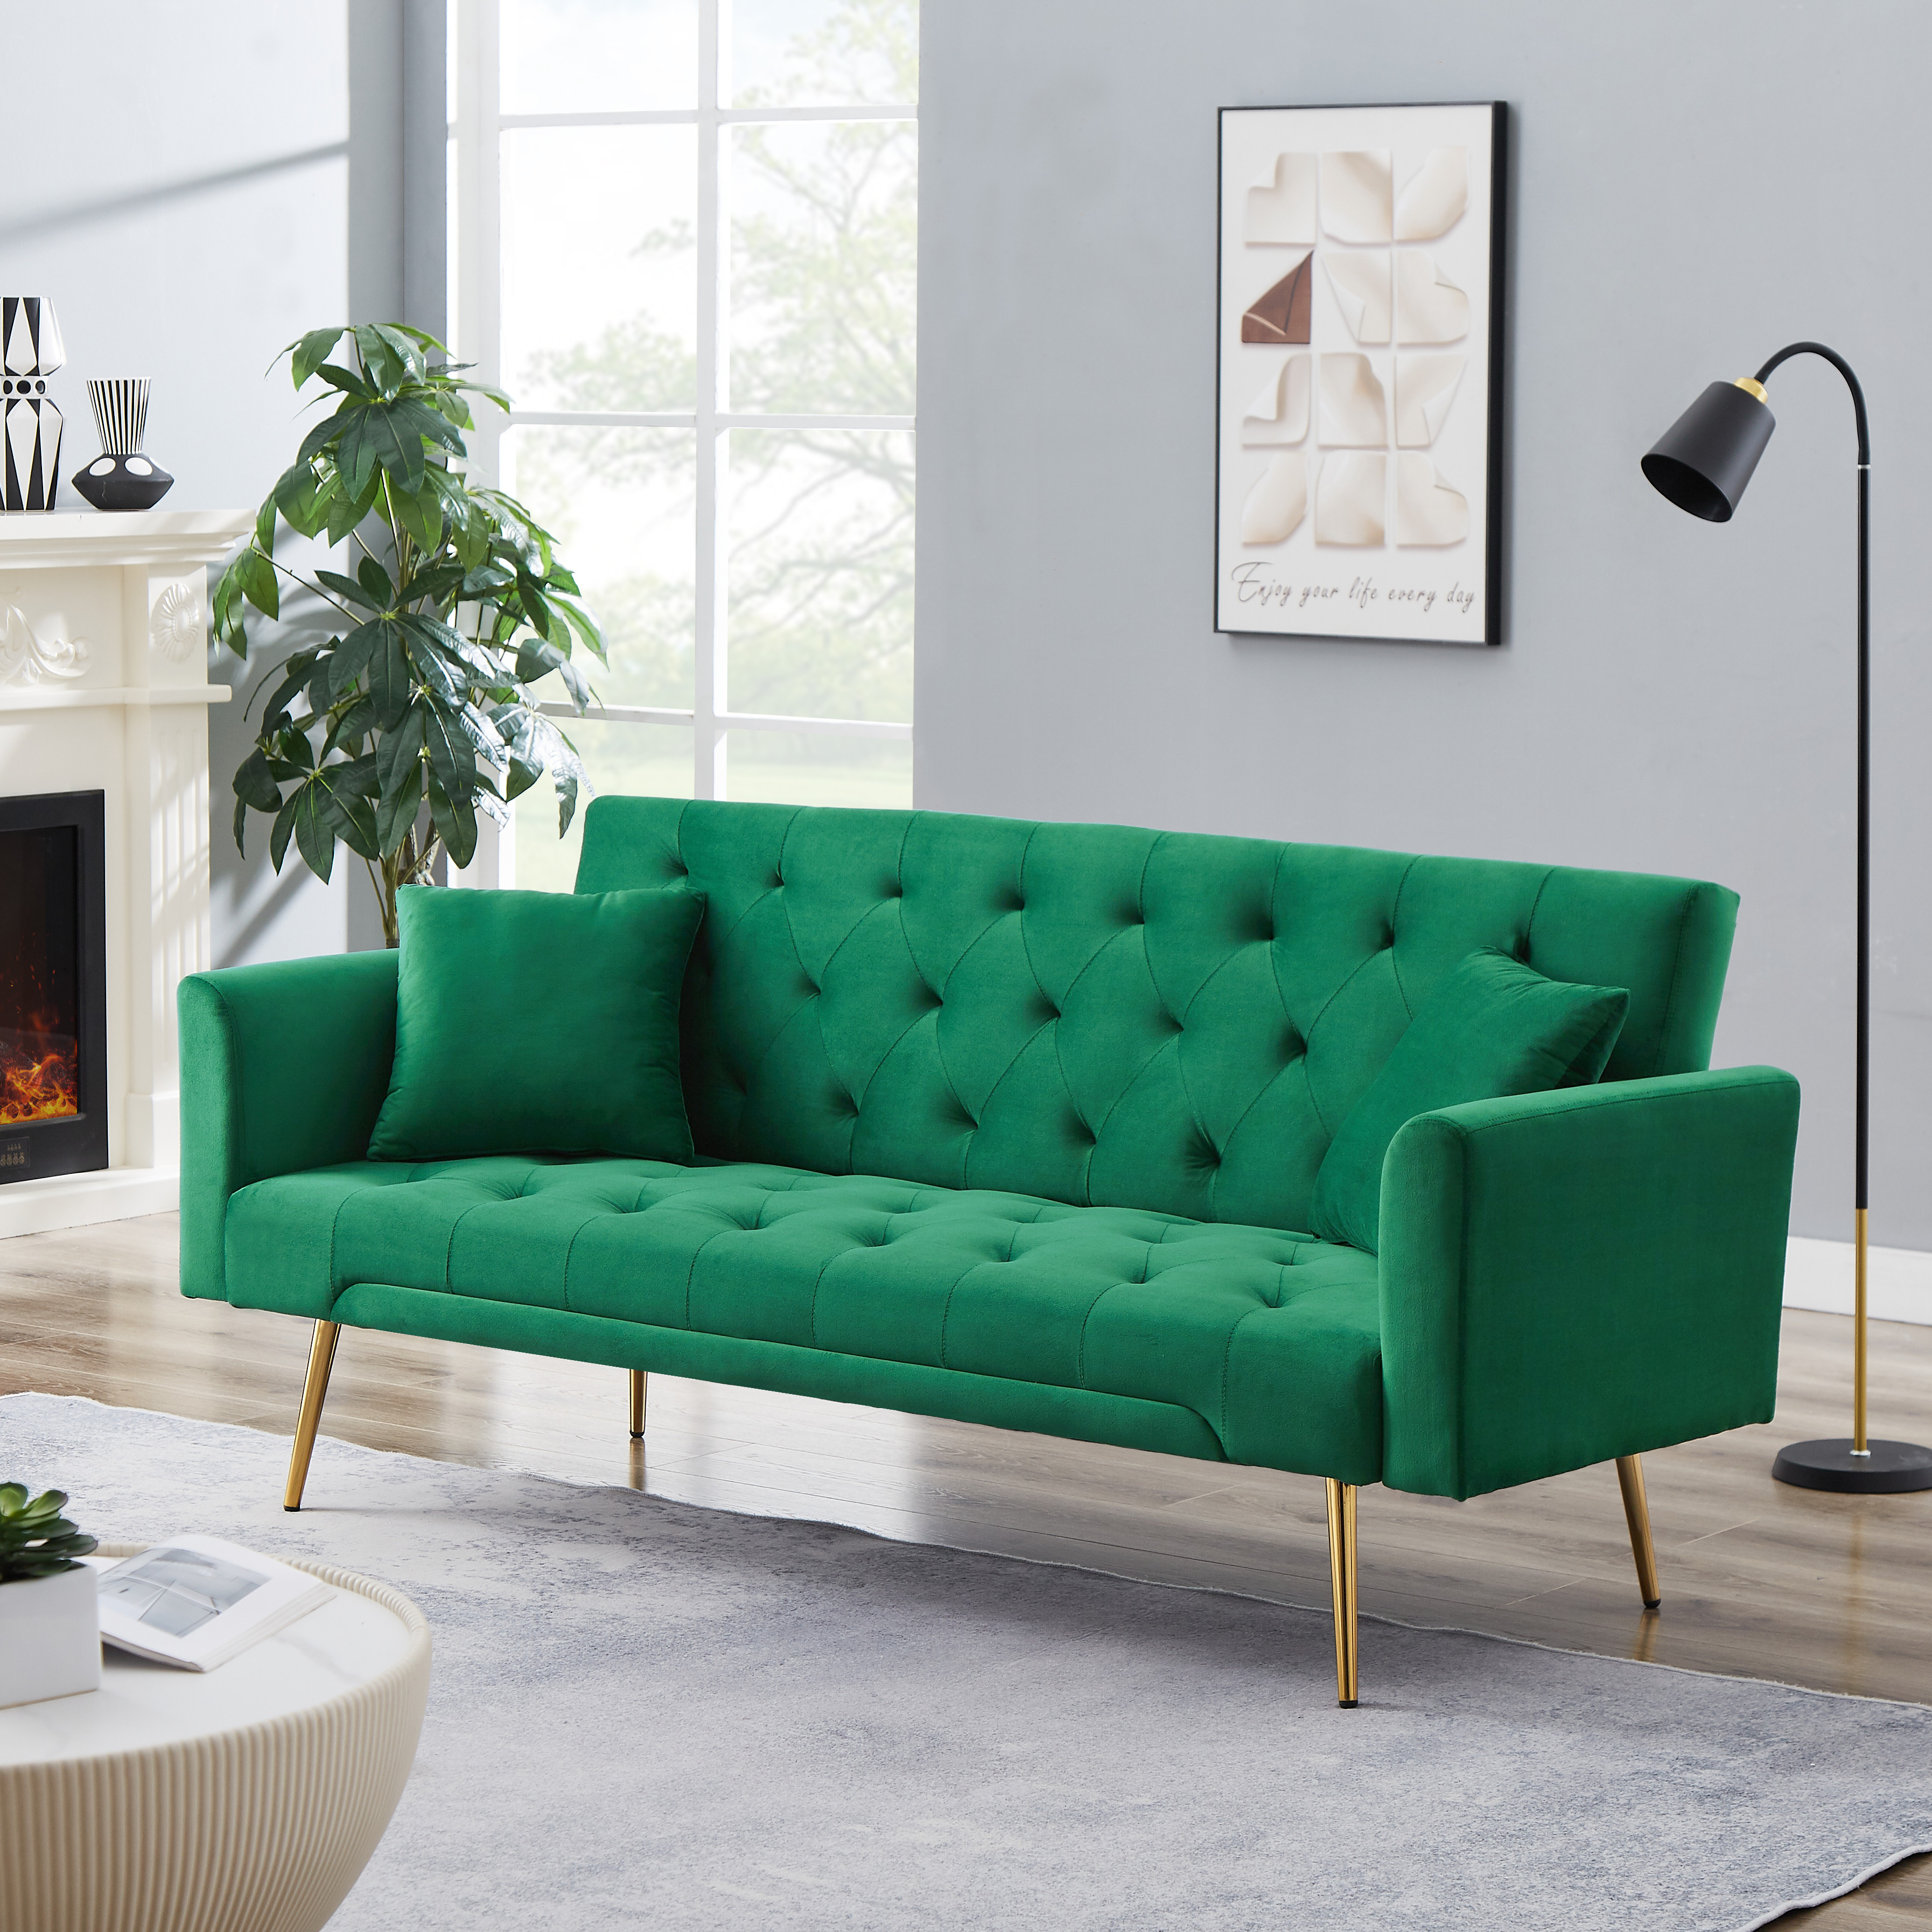 uhomepro Modern Sofa Bed, Convertible Sleeper Sofa with Metal Legs, 2 Pillows, Upholstery Fabric Futon Sofa Bed, Love Seat Living Room Bedroom Furniture for Small Space Office, Green - image 1 of 9